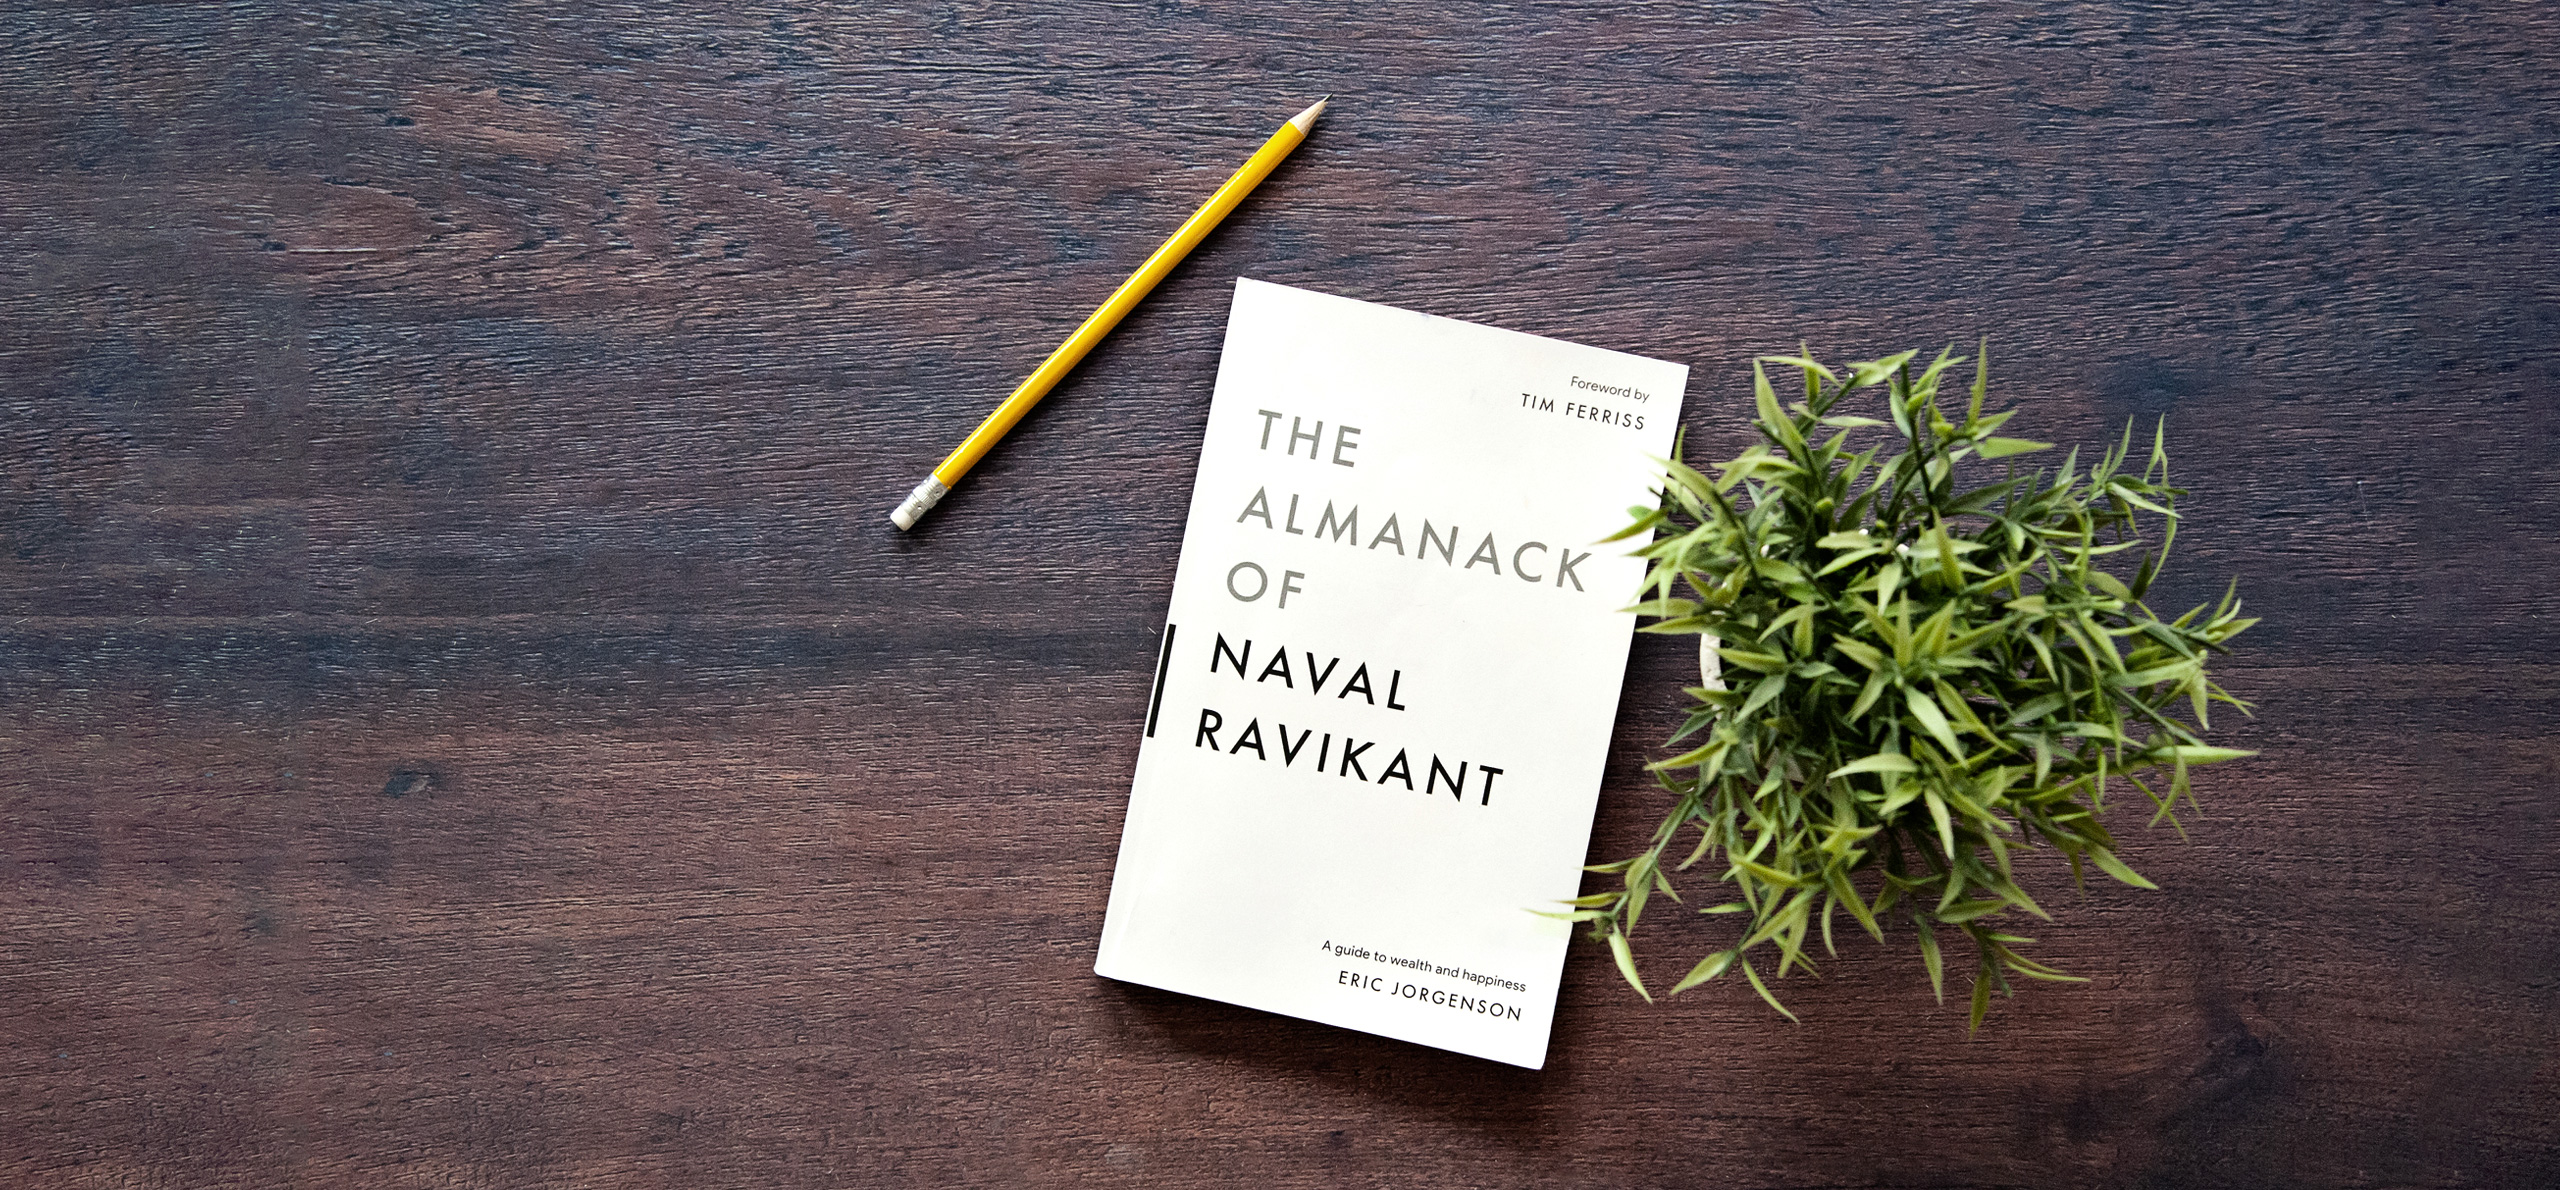 Insights from 'The Almanack of Naval Ravikant' by Eric Jorgenson